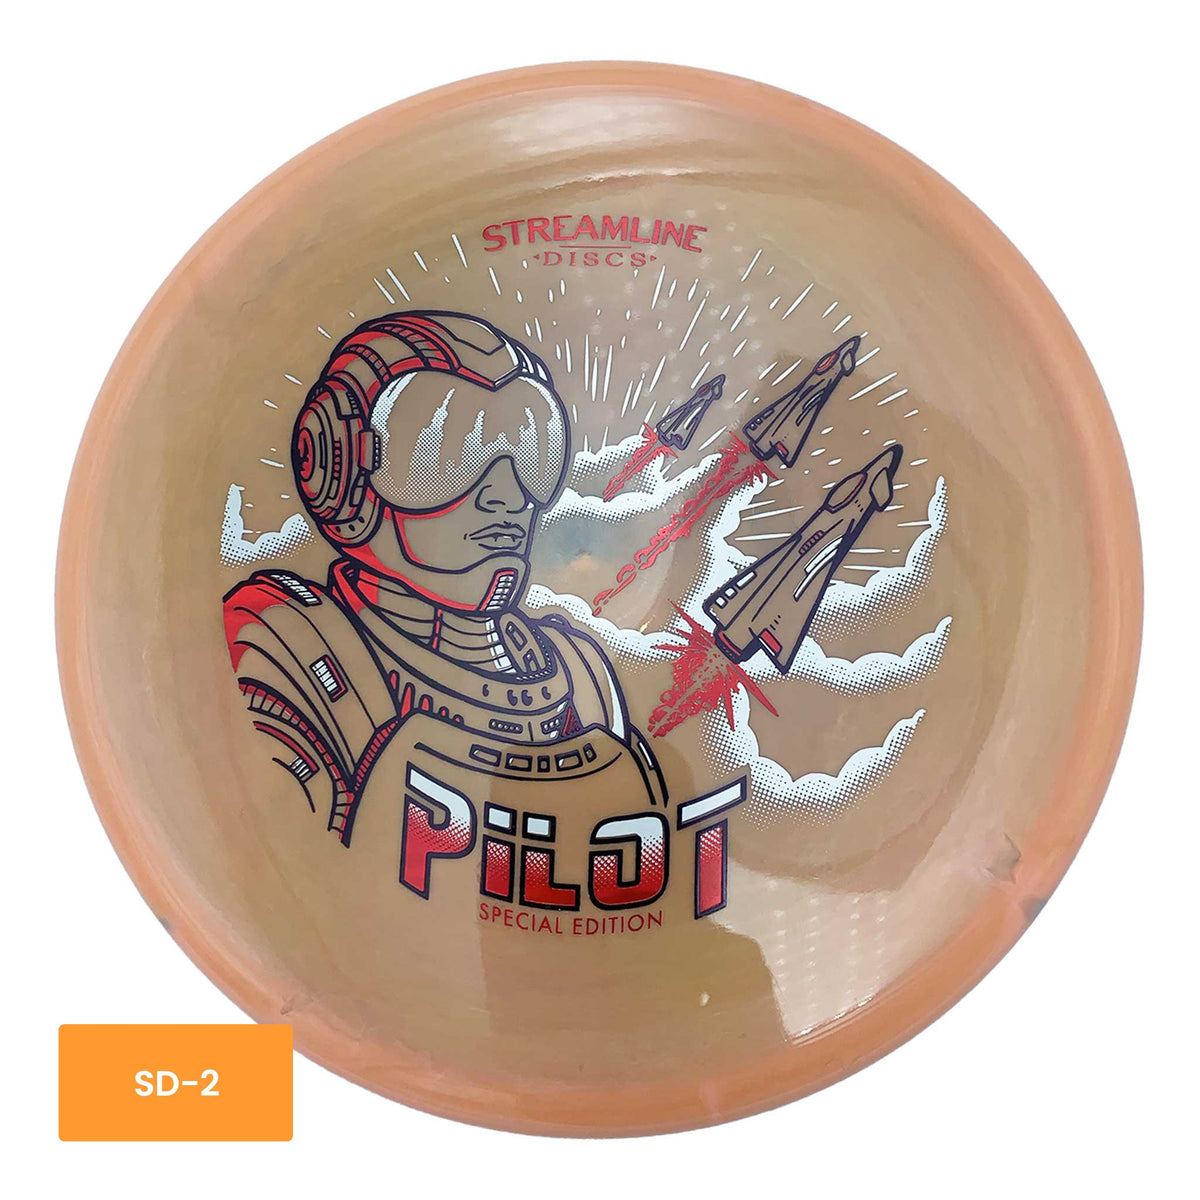 Streamline Discs Neutron Pilot Special Edition putter and approach - Photo ID SD-2